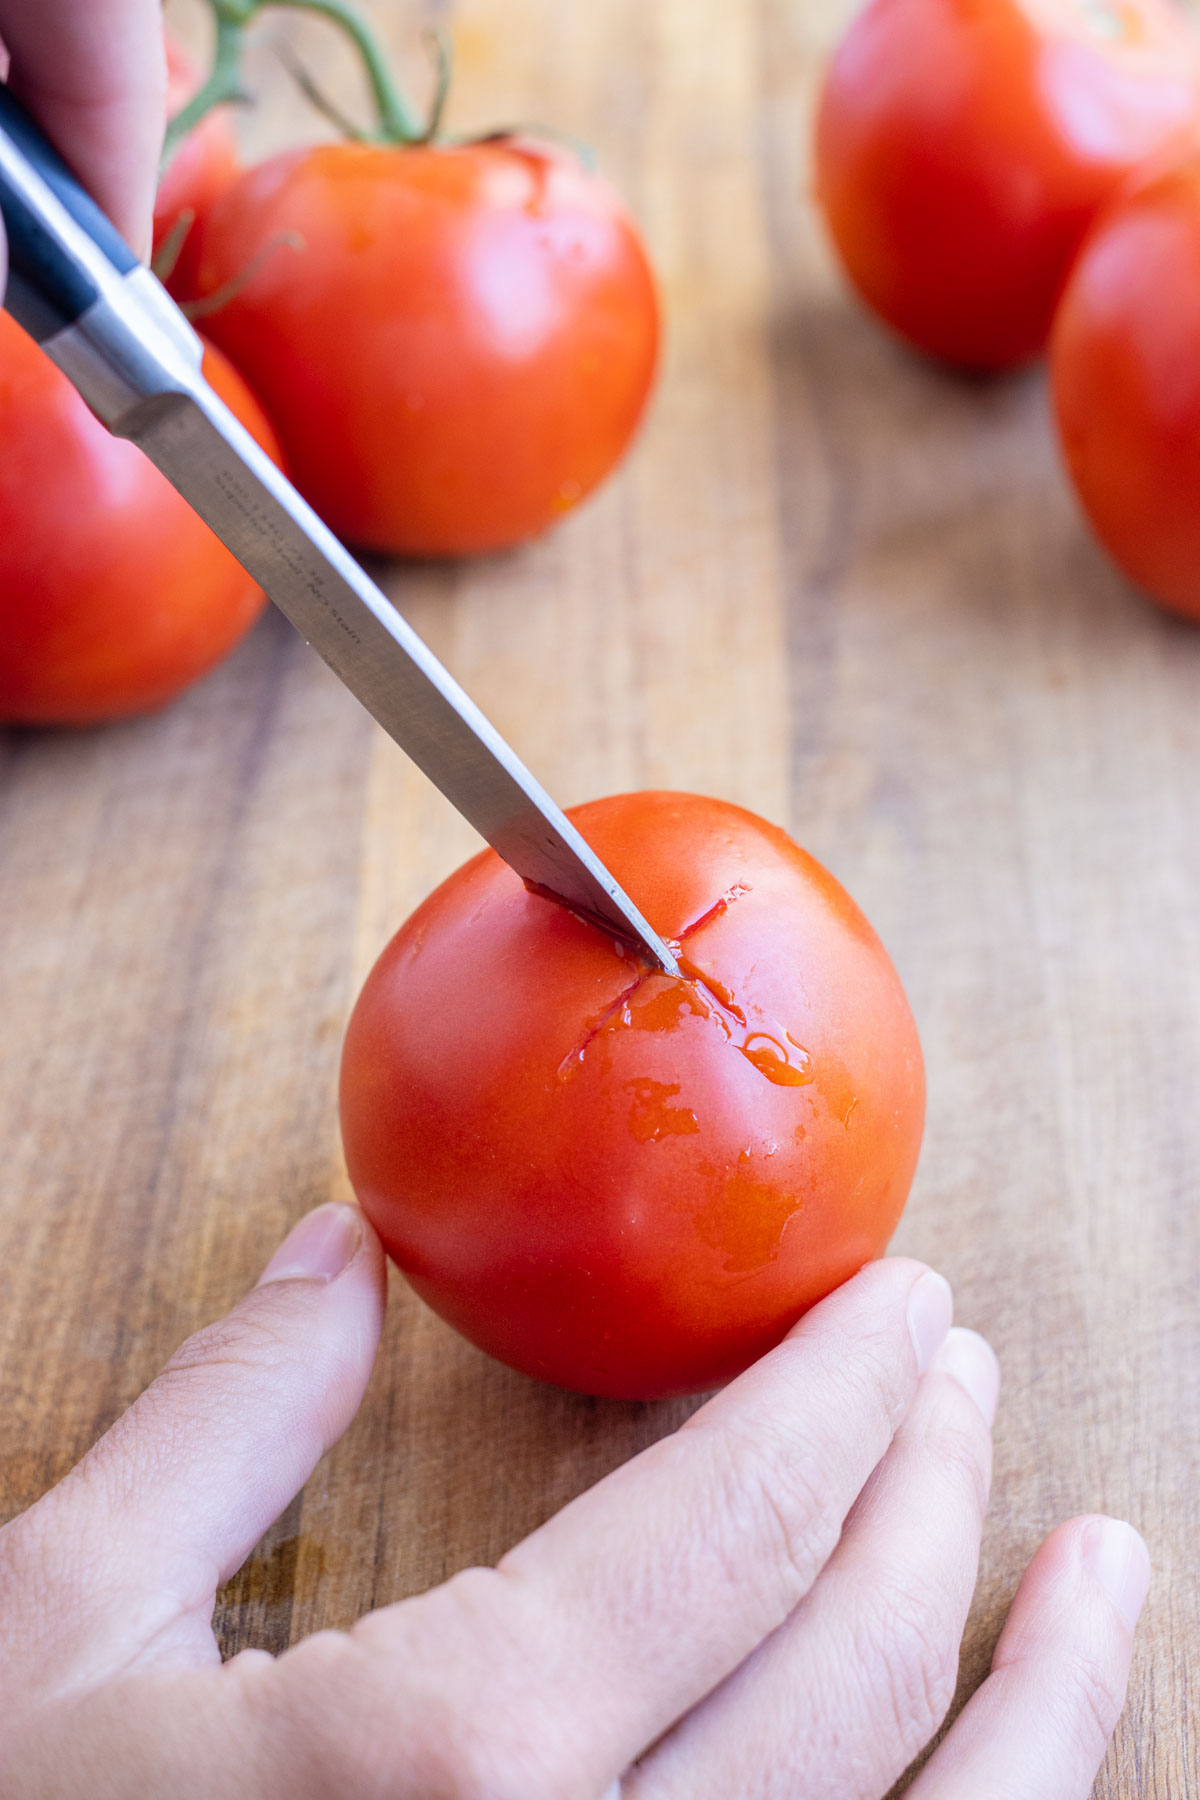 A sharp knife scores an X on the bottom of the tomato to make peeling easier.